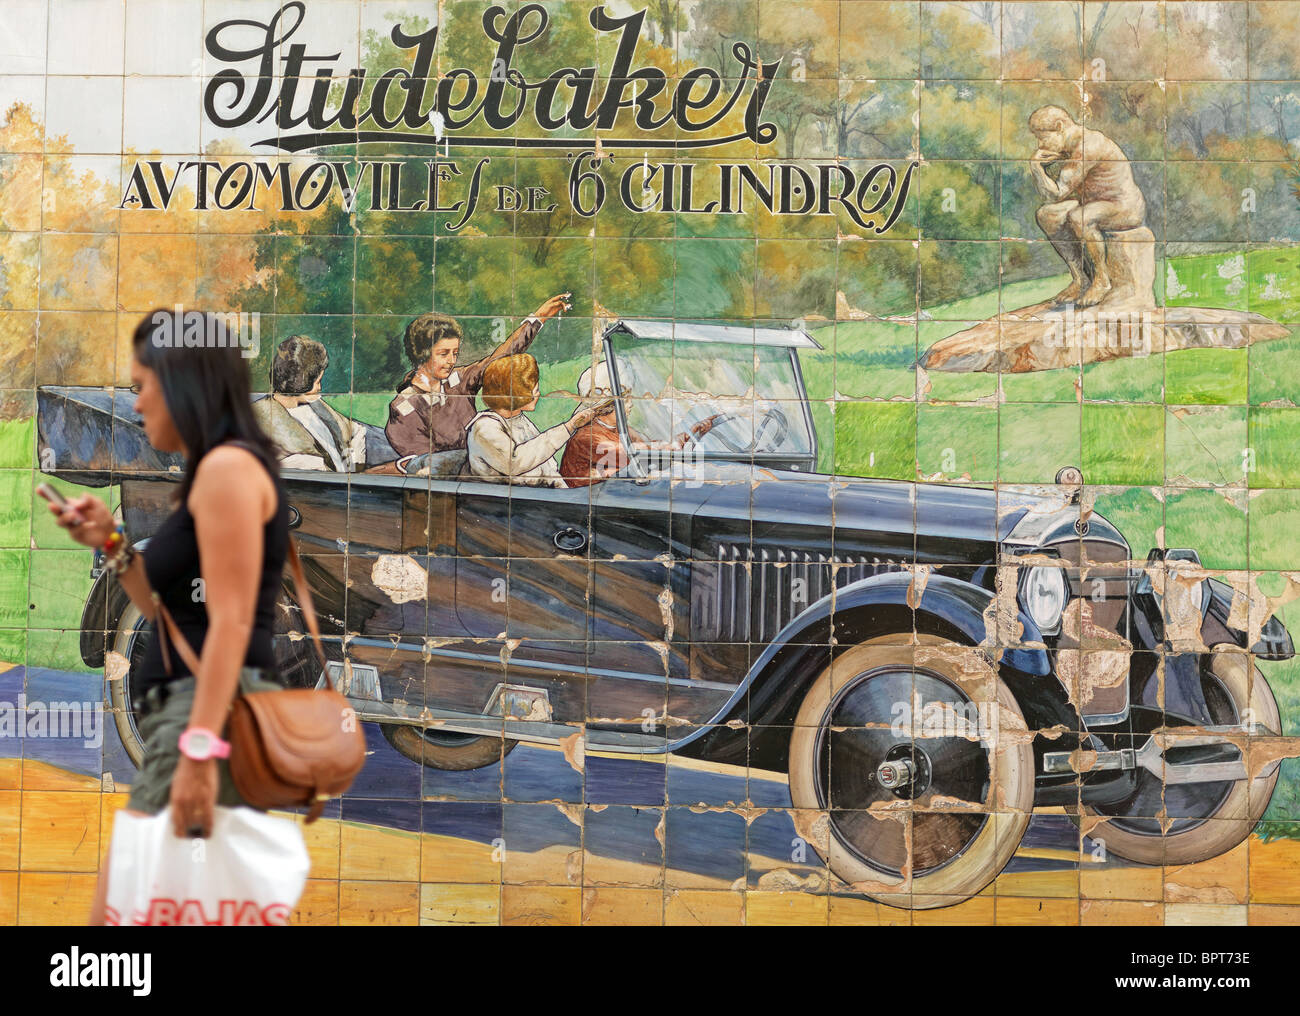 A wall painting showing a historical Studebaker car is pictured in downtown Seville, Andalusia, Spain, August 27, 2010. Stock Photo